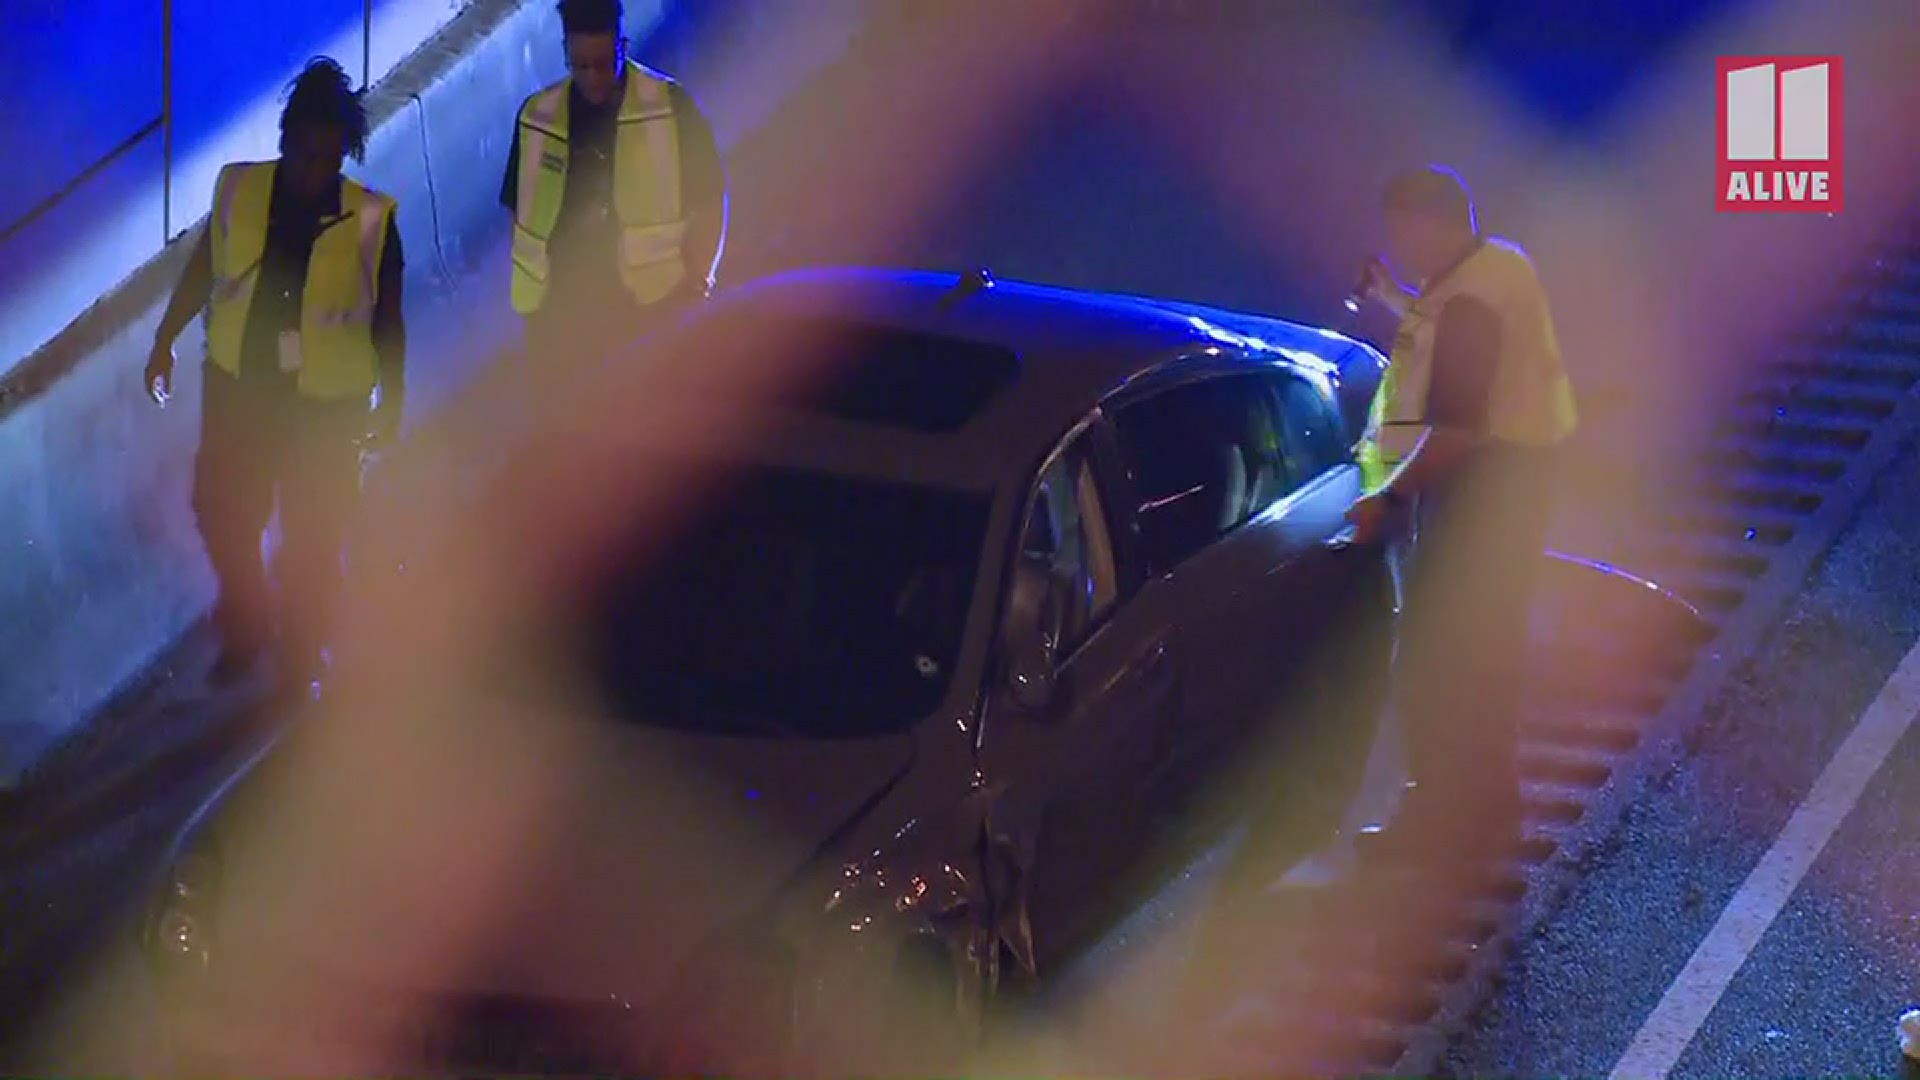 One person was hurt in what police called a road rage shooting on the Downtown Connector early Saturday morning.